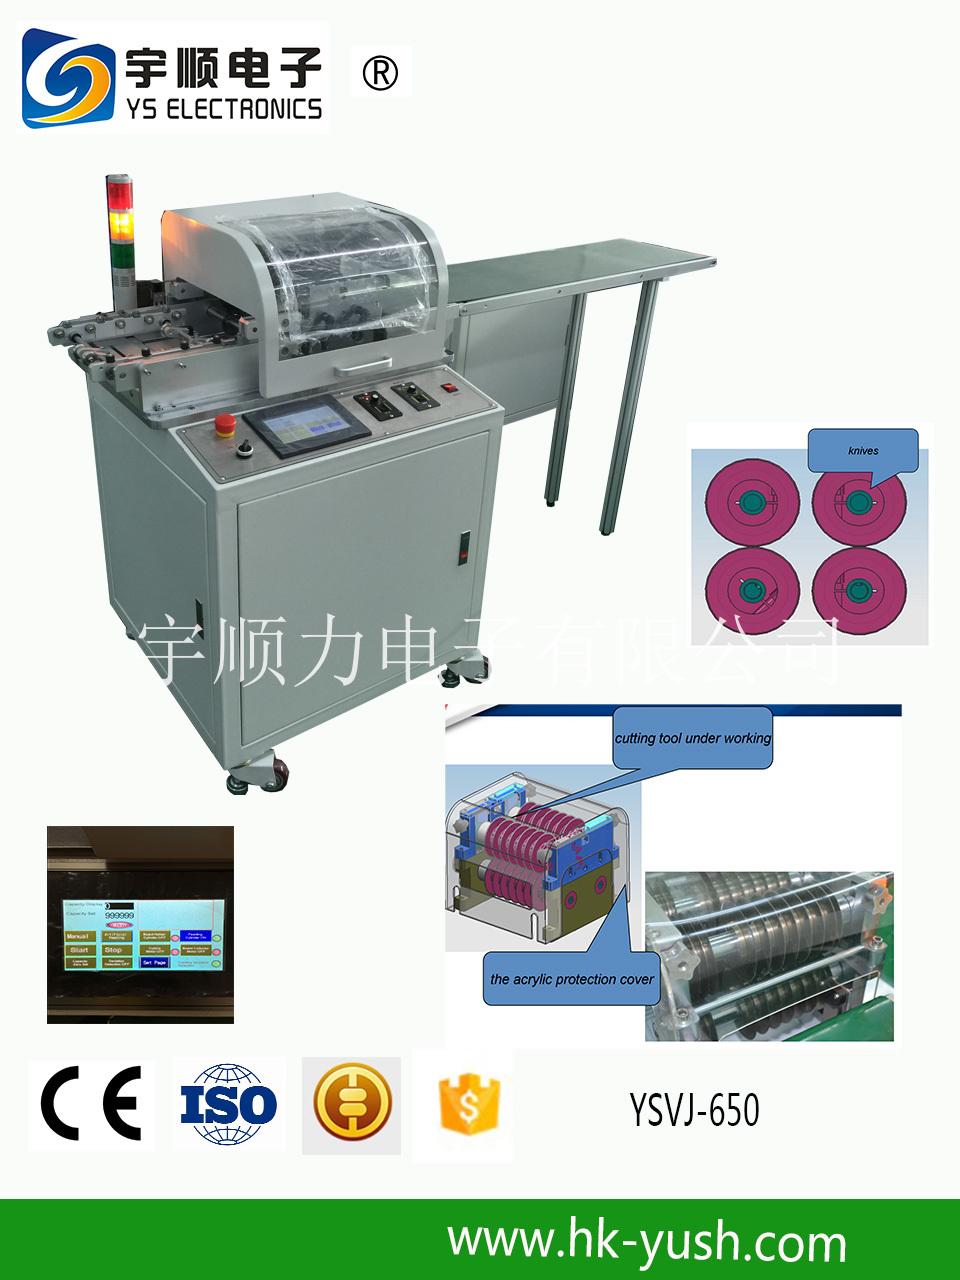 Multiple Groups Of Blades PCB Depaneling YSVJ-650 Machine ,suitable for mass production